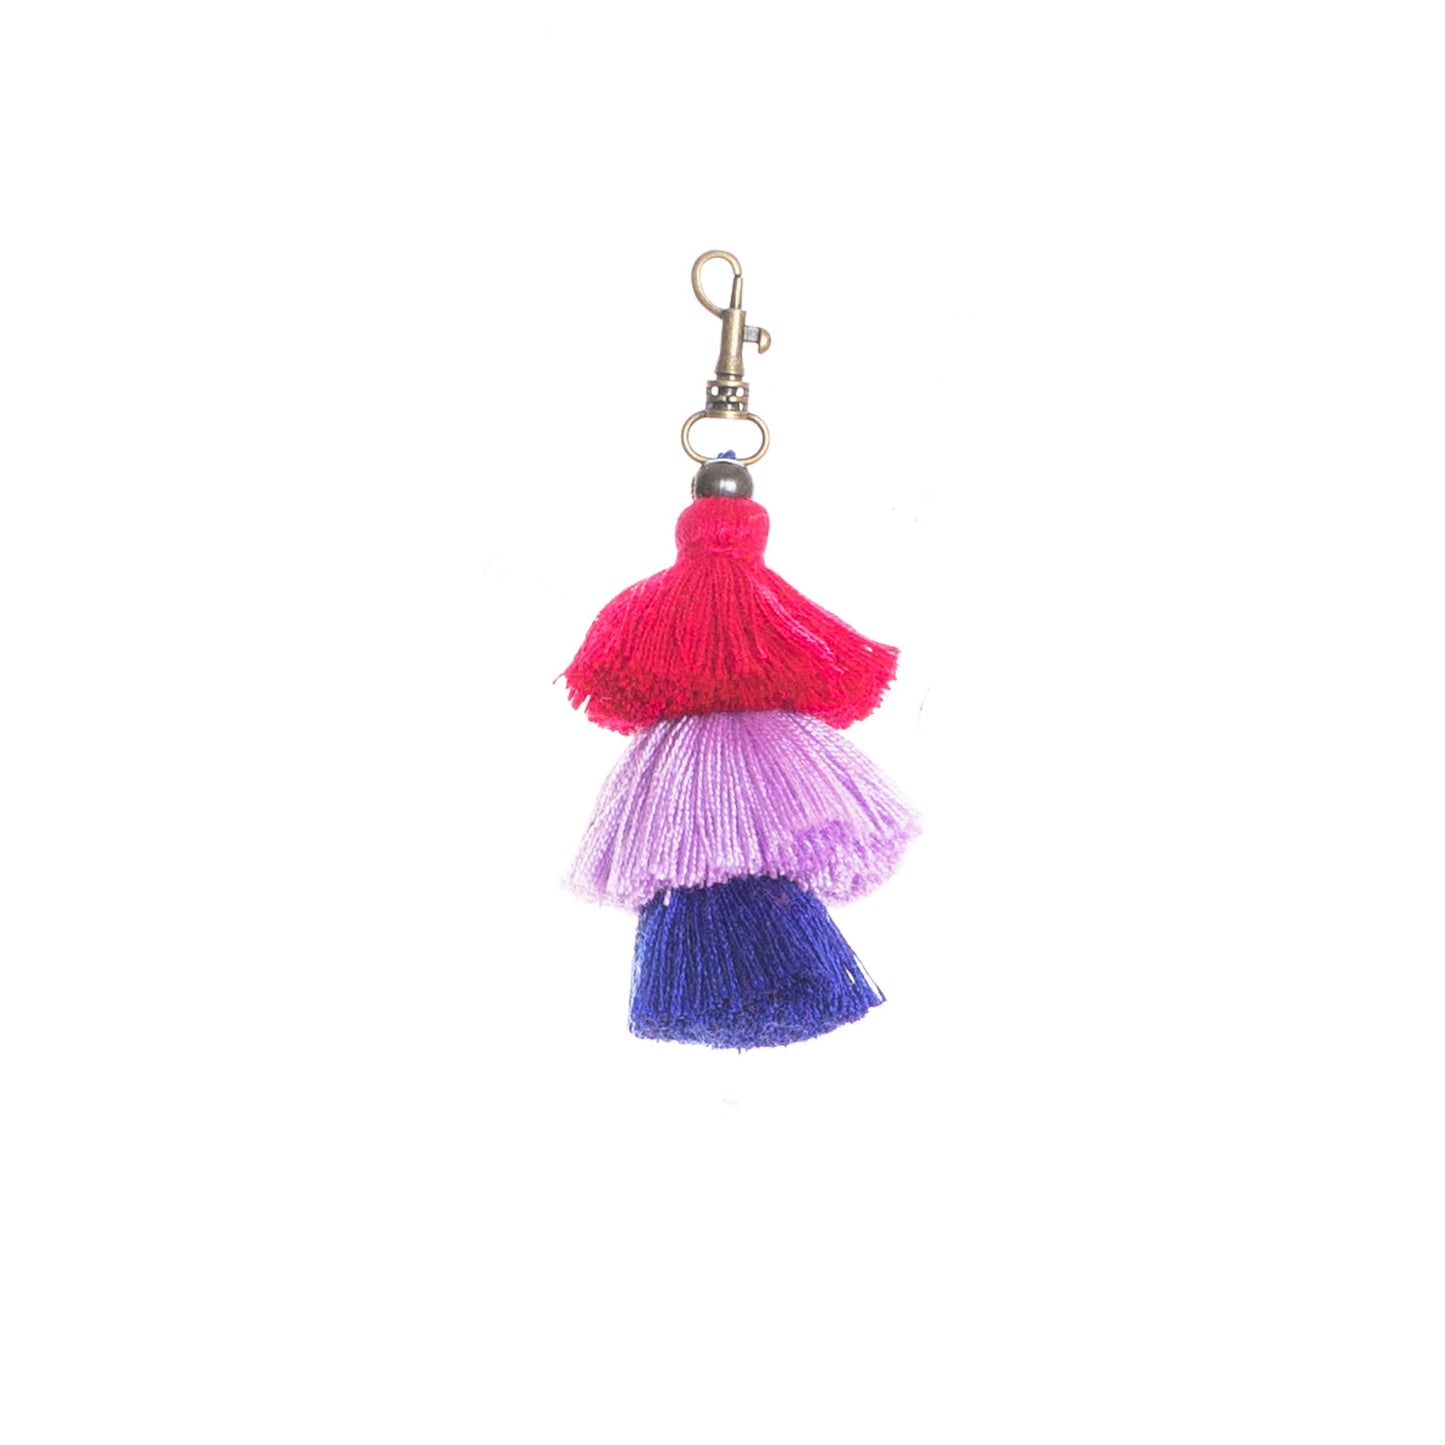 MINI 3-TIER TASSEL - ACCESSORIES COLLECTION - RED/LAVENDER/ROYAL